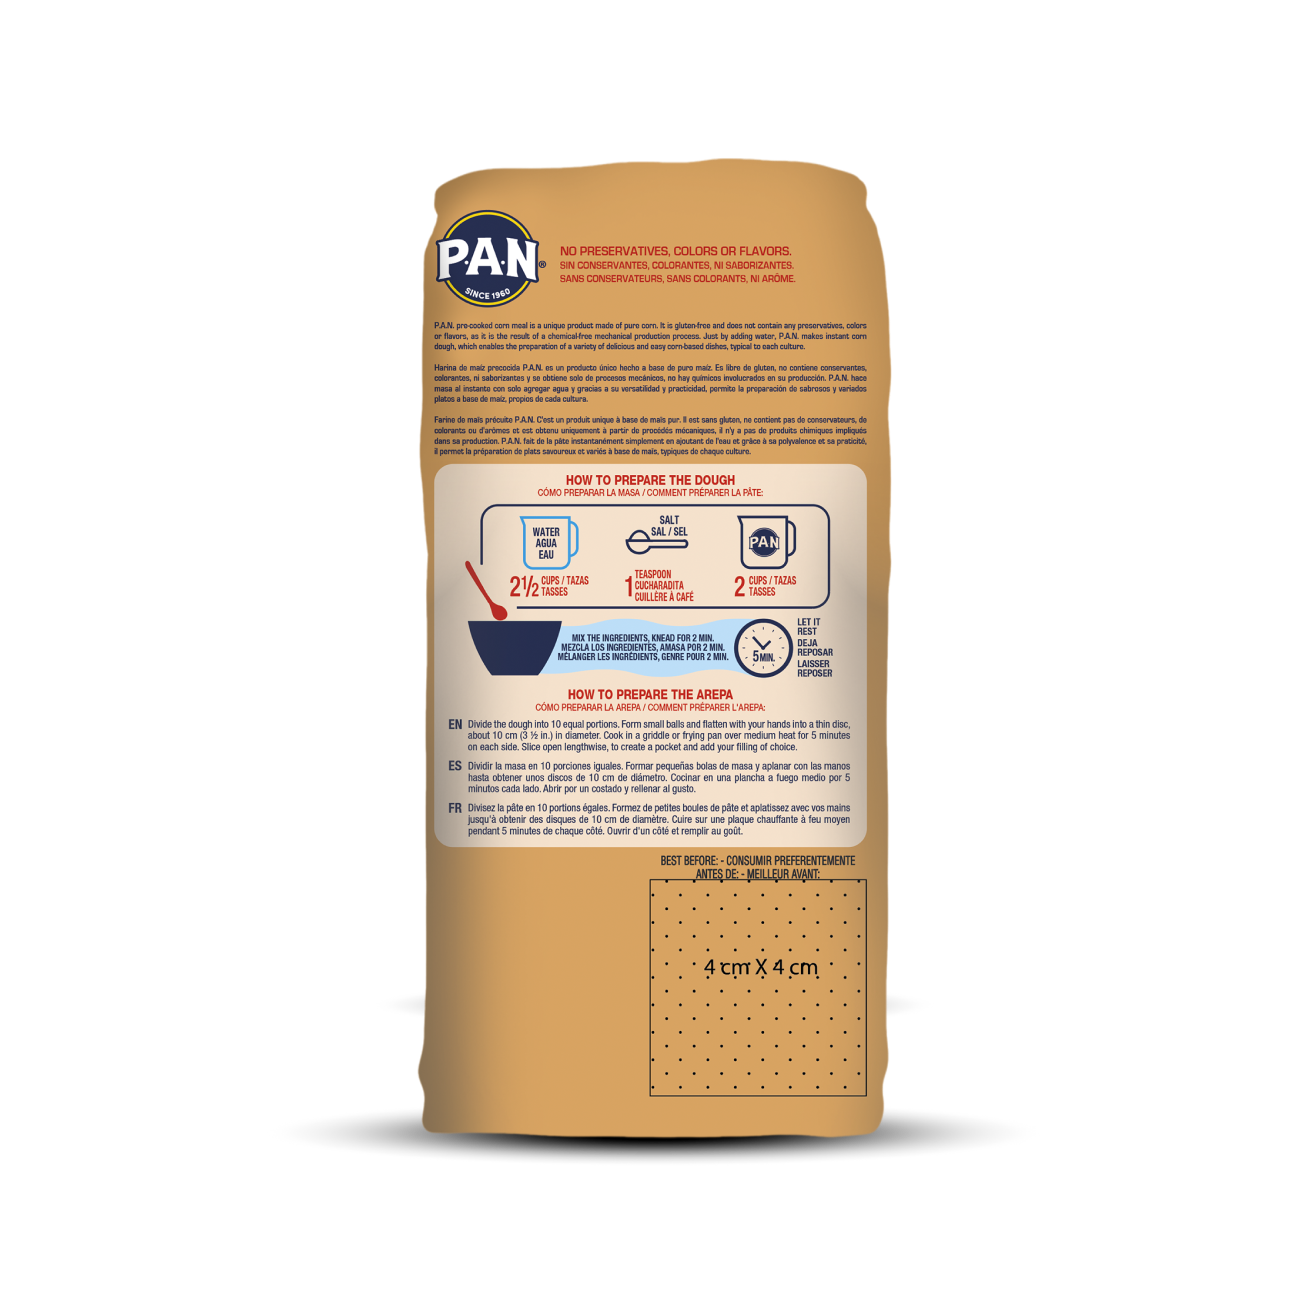 PRE-COOKED YELLOW CORN MEAL P.A.N. 1 kg. GLUTEN FREE – P.A.N. USA